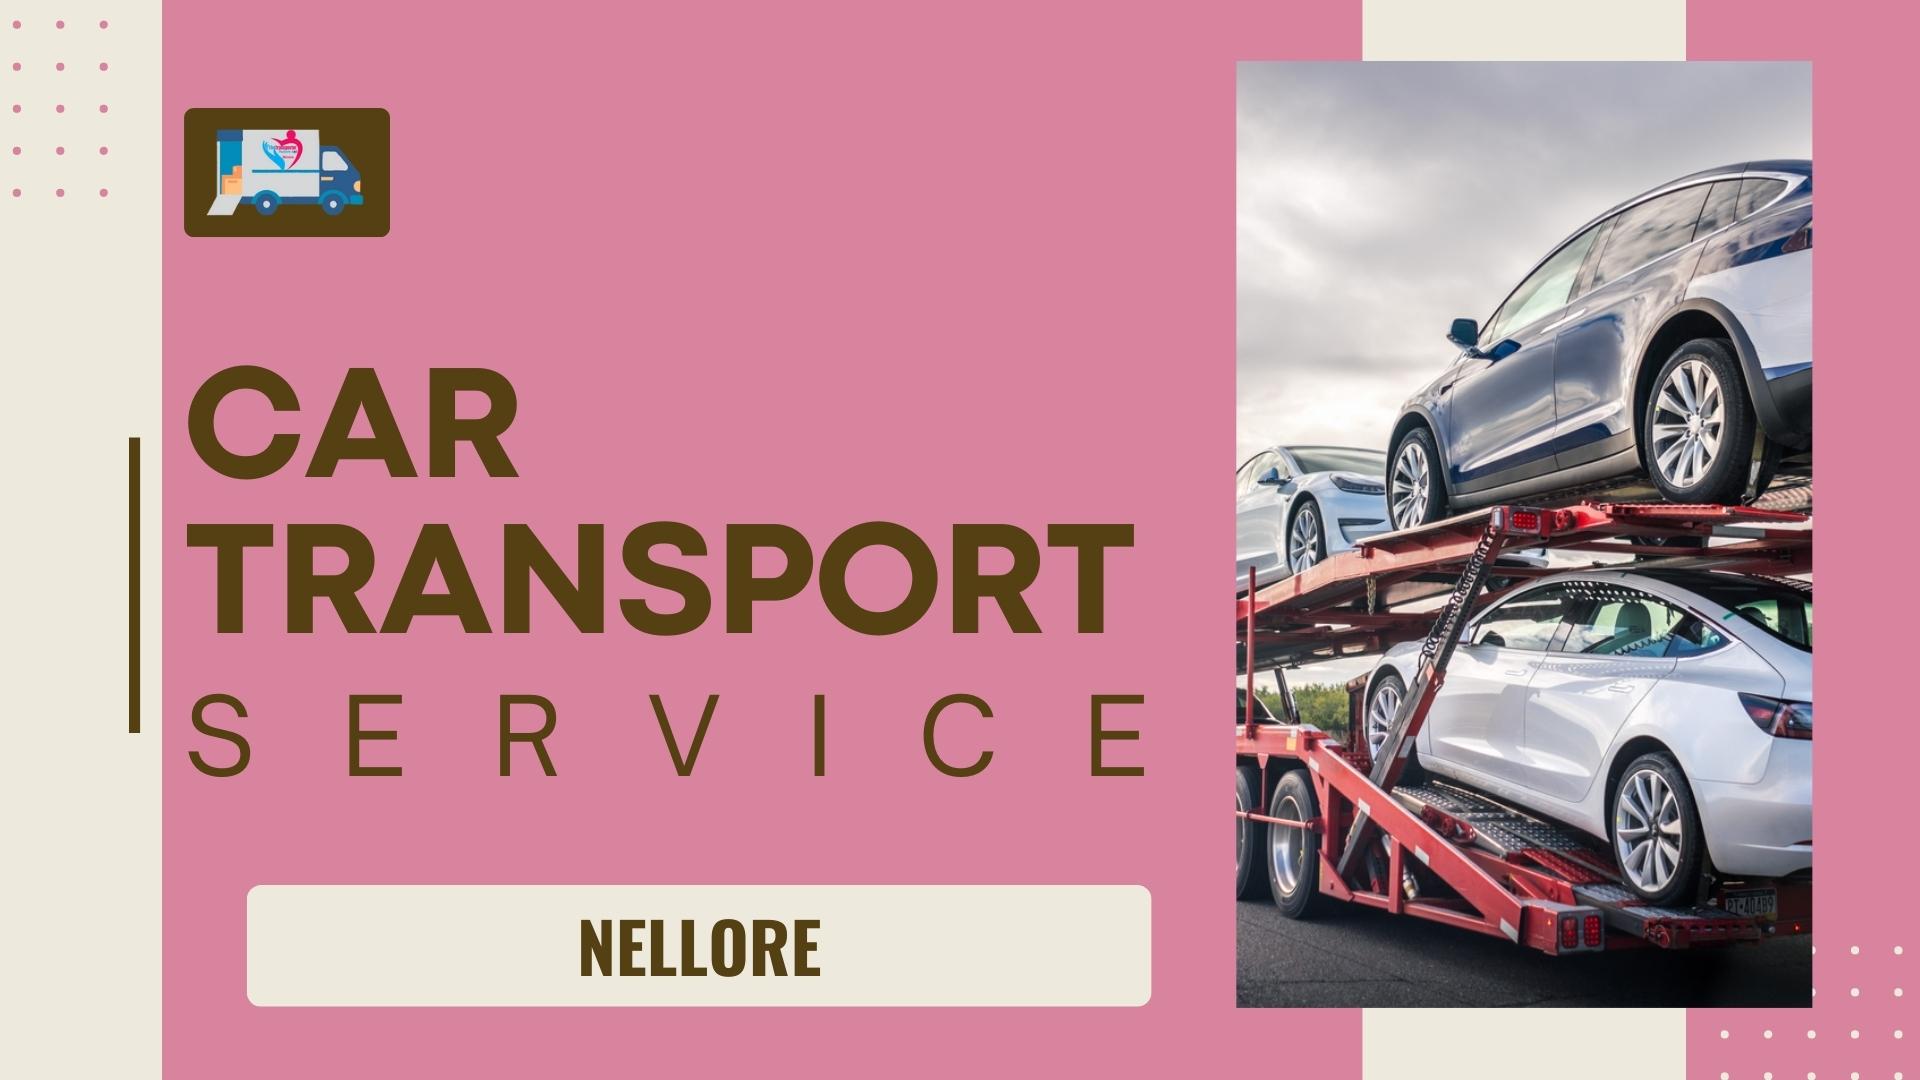 Quality car Carrier Service in Nellore